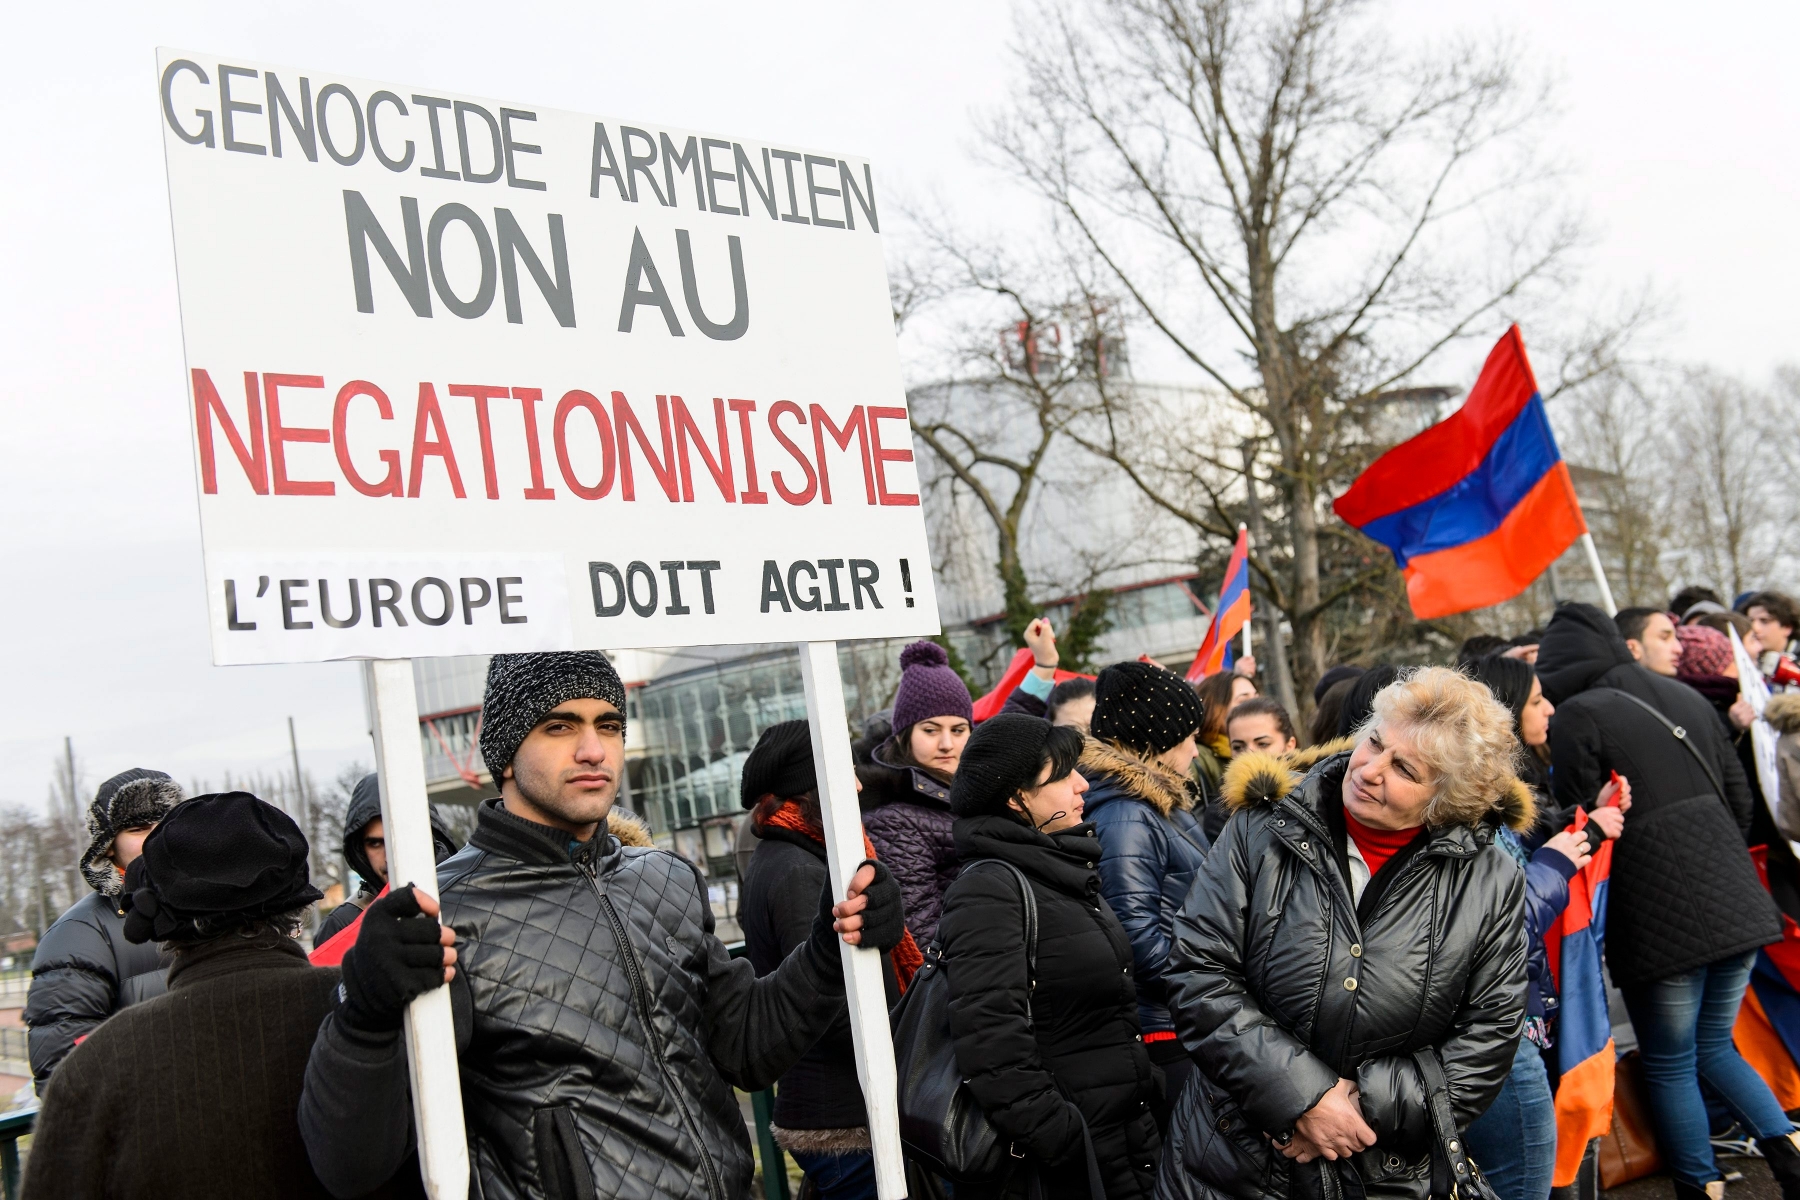 Armenian supporters hold banners during the hearing in the case Perincek vs Switzerland, at the European Court of Human Rights (ECHR) in Strasbourg, France, Wednesday, January 28, 2015. The European Court of Human Rights holds a Grand Chamber Hearing in the case between turkish political activist Dogu Perincek and Switzerland concerning freedom of expression. Perincek was convicted by a Swiss court following comments denying the Armenian Genocide during a visit in Switzerland 2007. (KEYSTONE/Jean-Christophe Bott) FRANCE SWITZERLAND ECHR PERINCEK